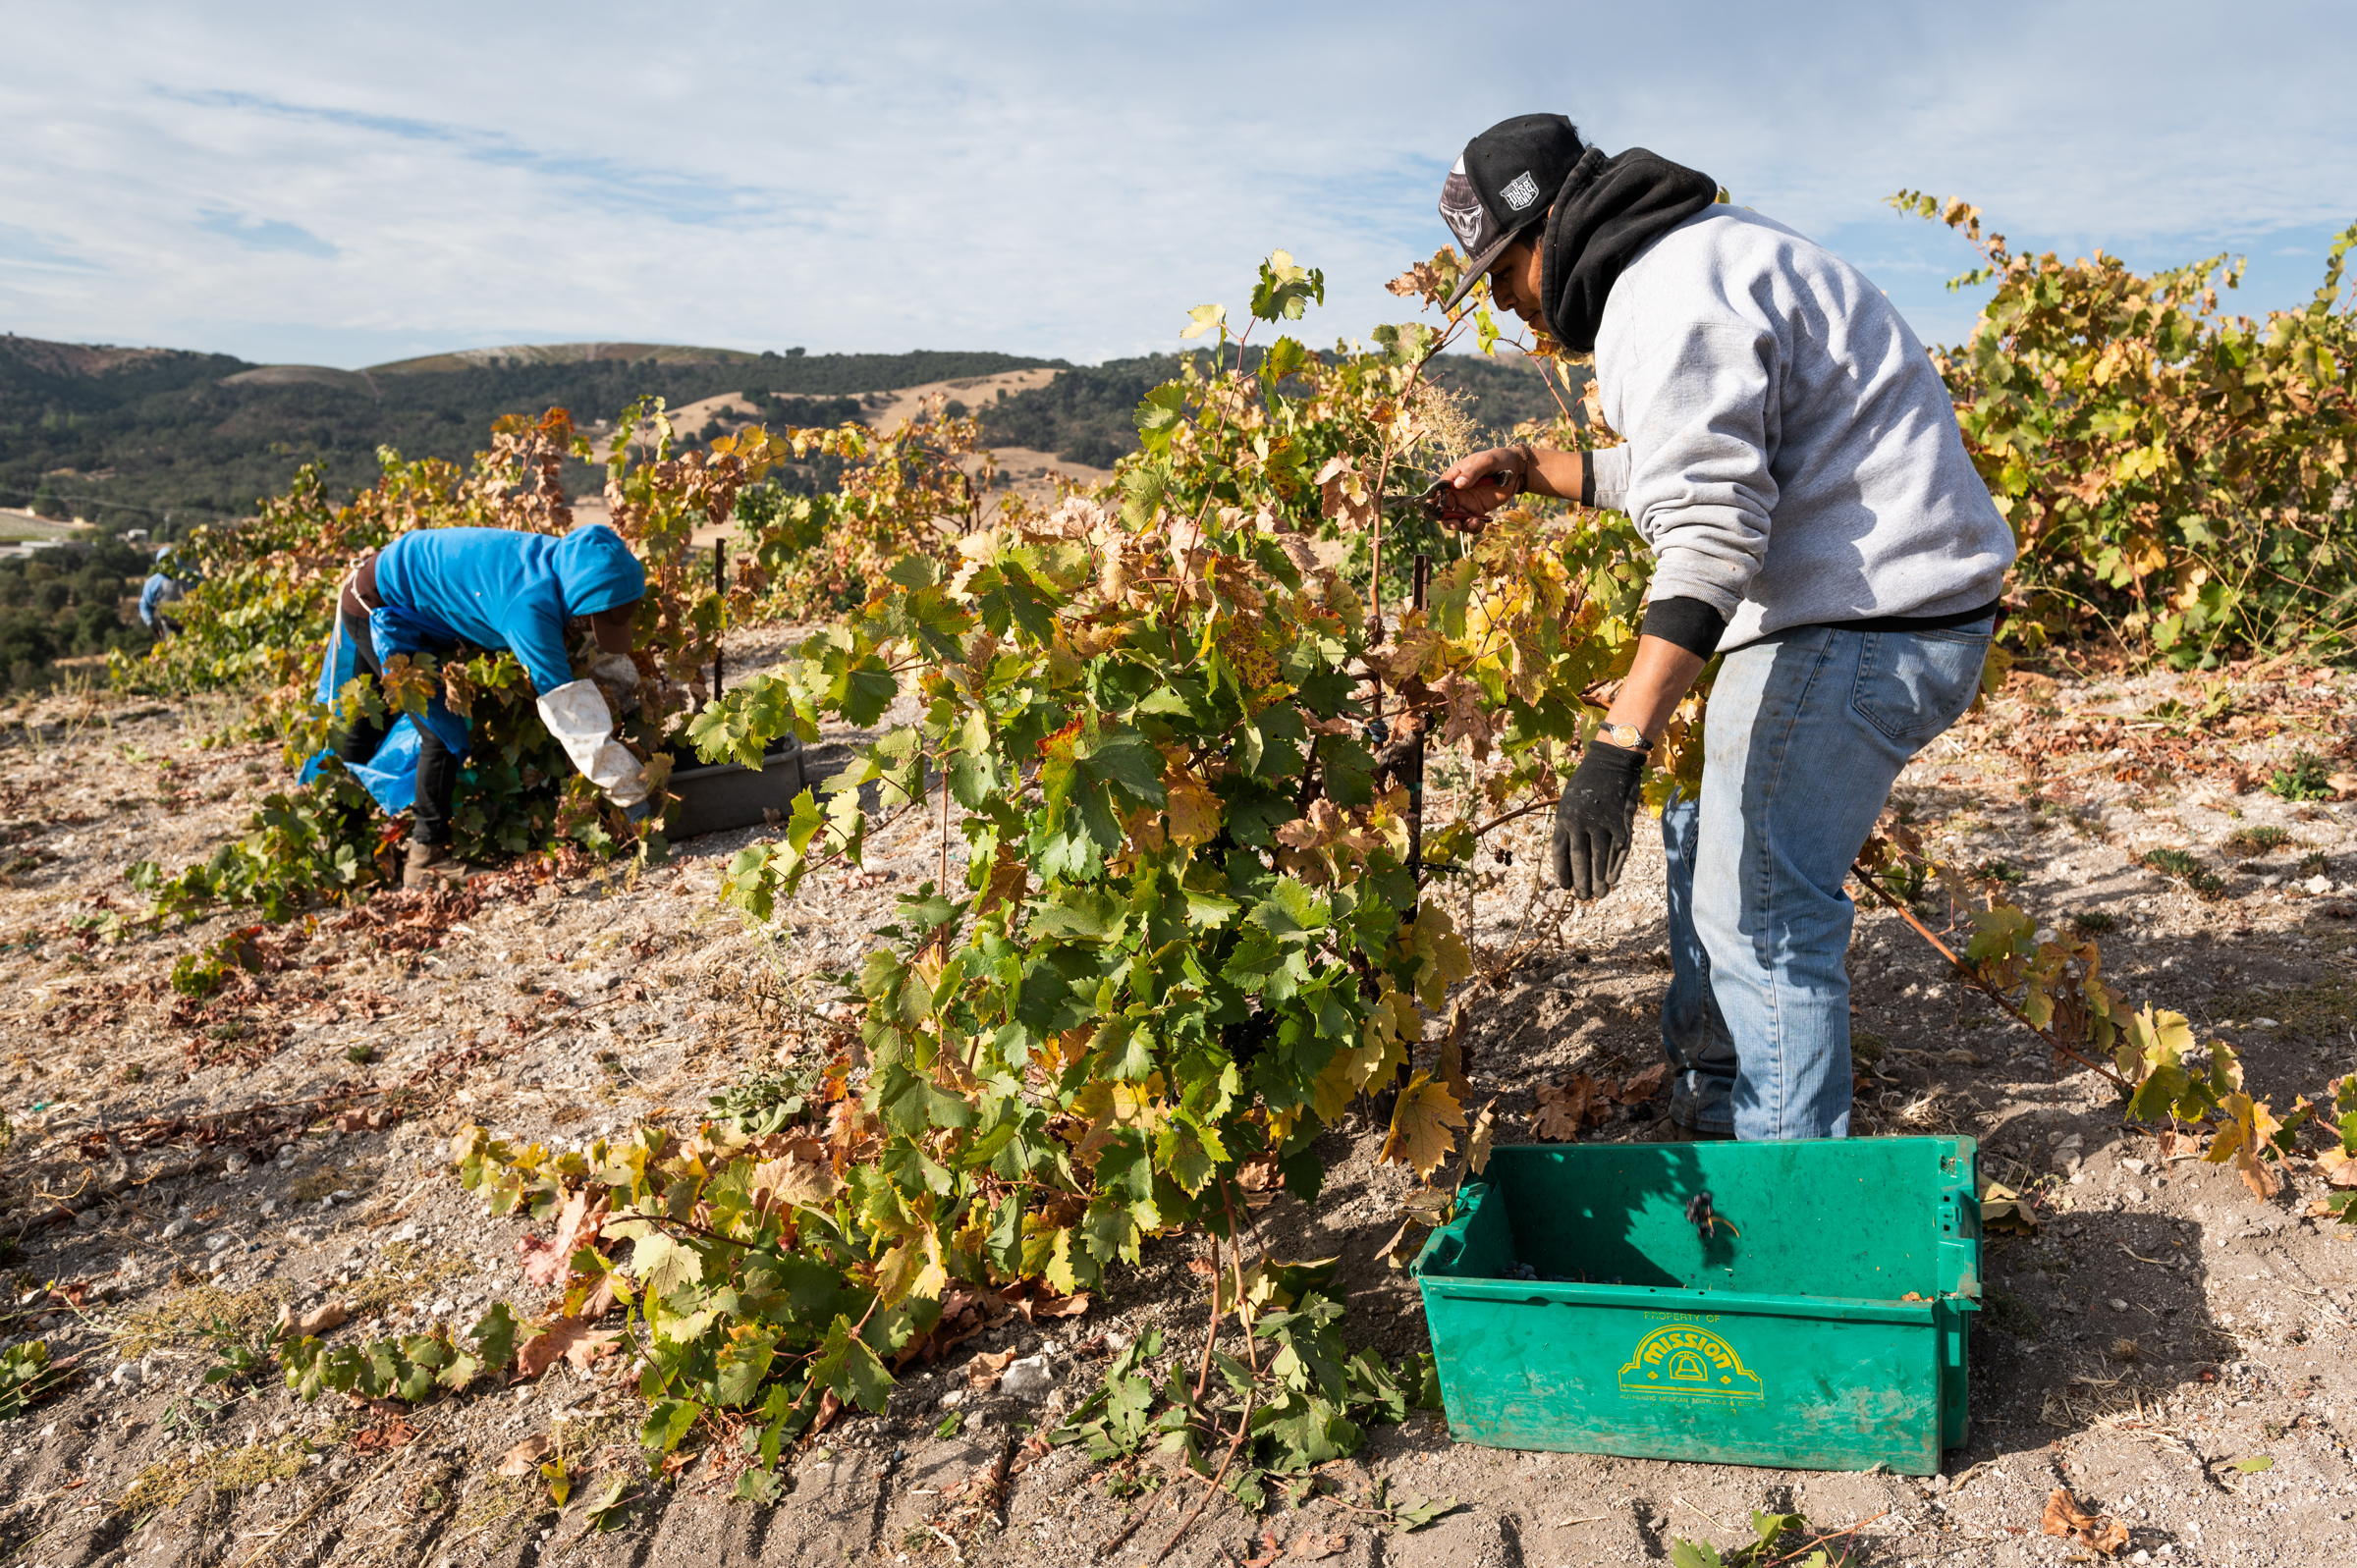 Field workers harvest wine grapes along California's Central Coast